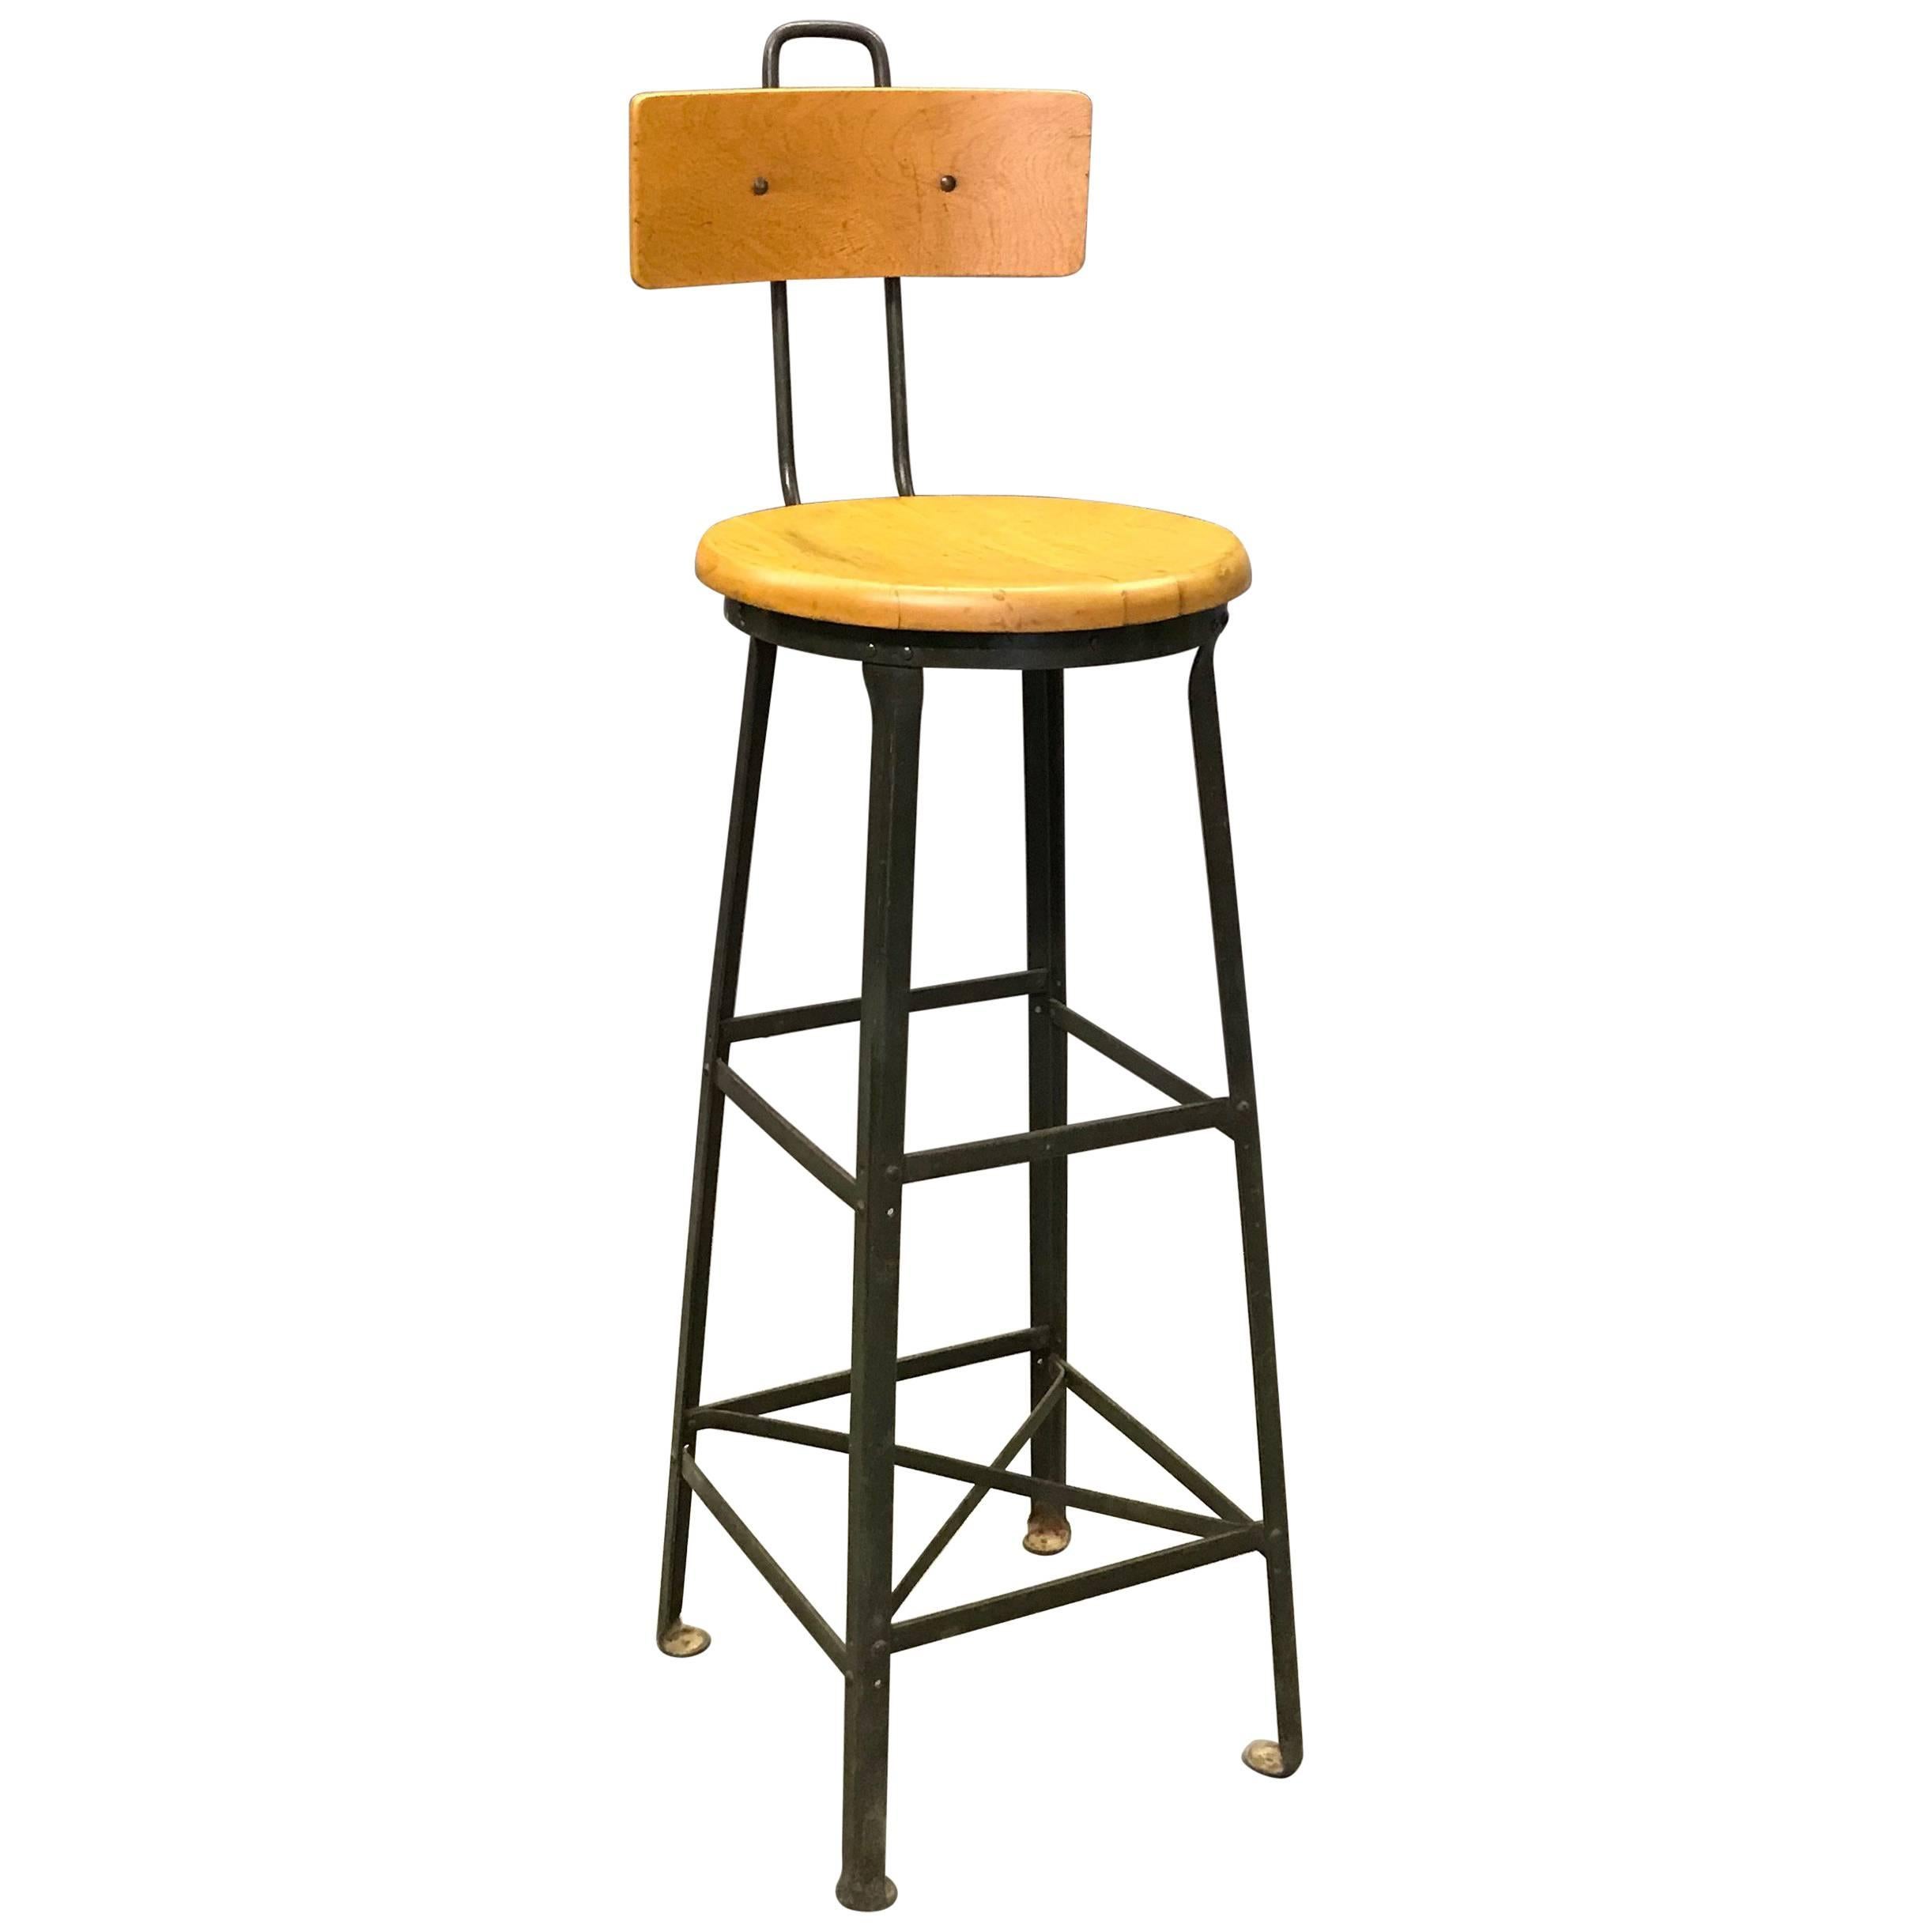 Tall Industrial Train Station Switchboard Operator Stool